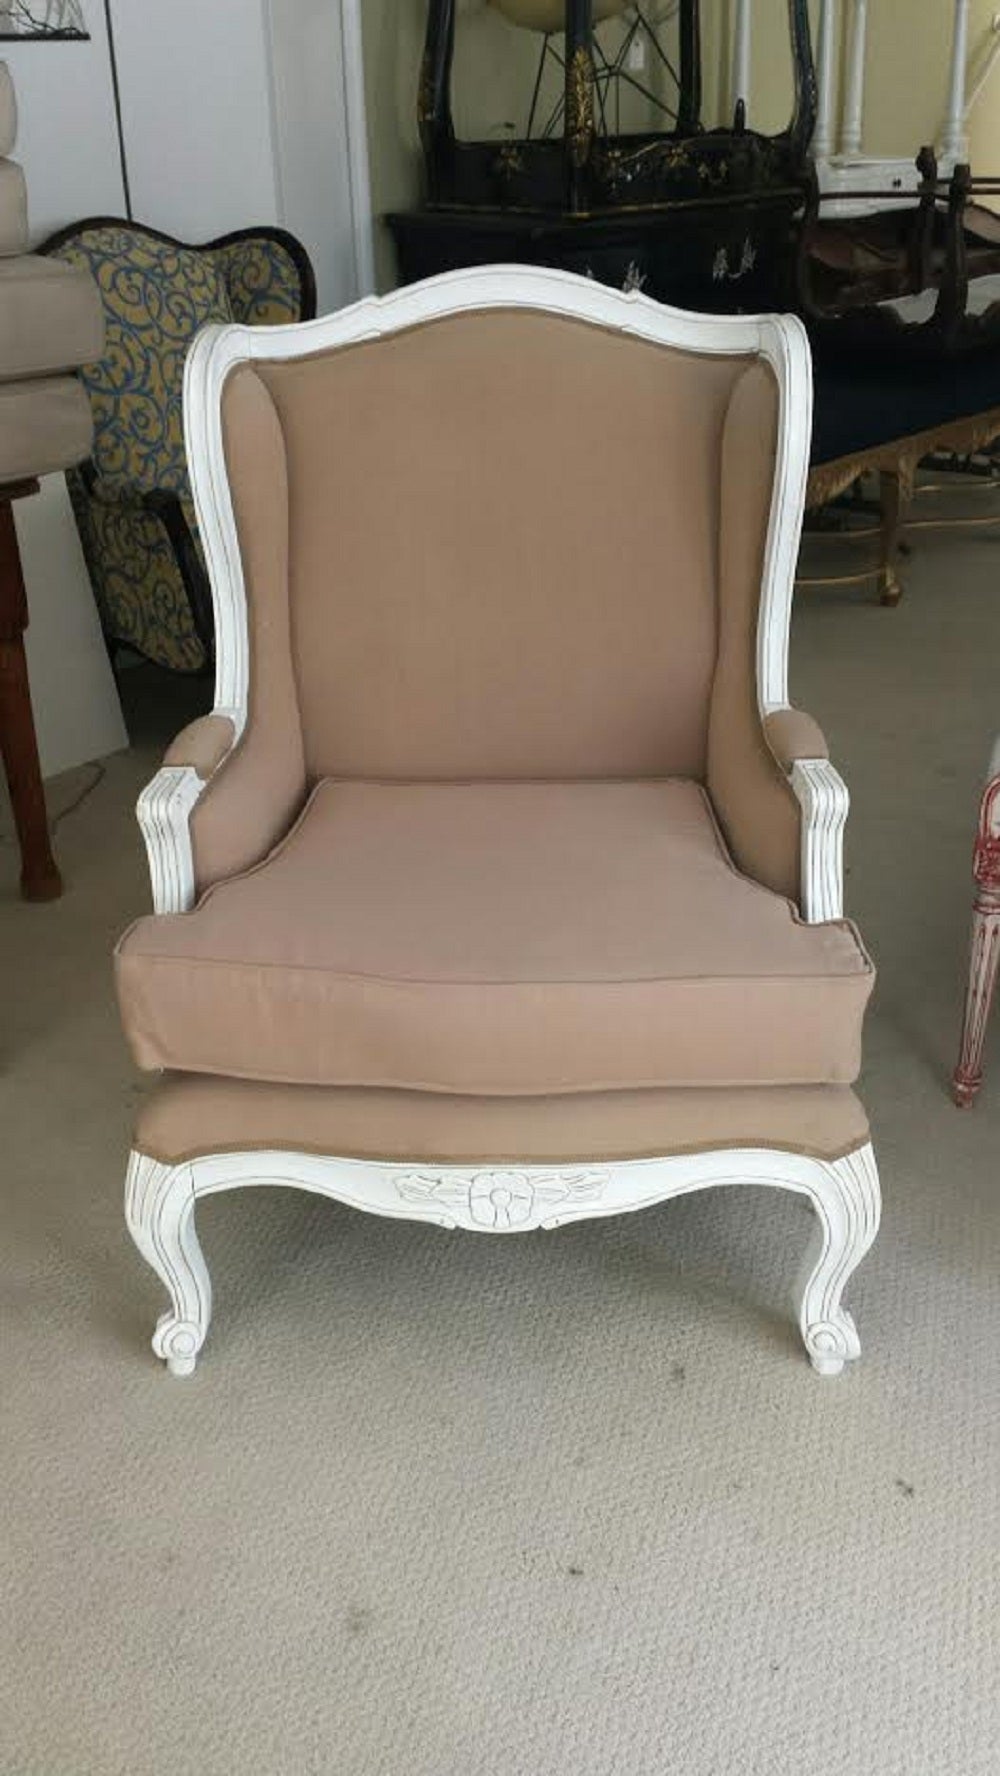 Beautiful Pair of Armchairs in the French Louis XV style. White distressed wooden frame. Upholstered in Cotton in Taupe color with trim.